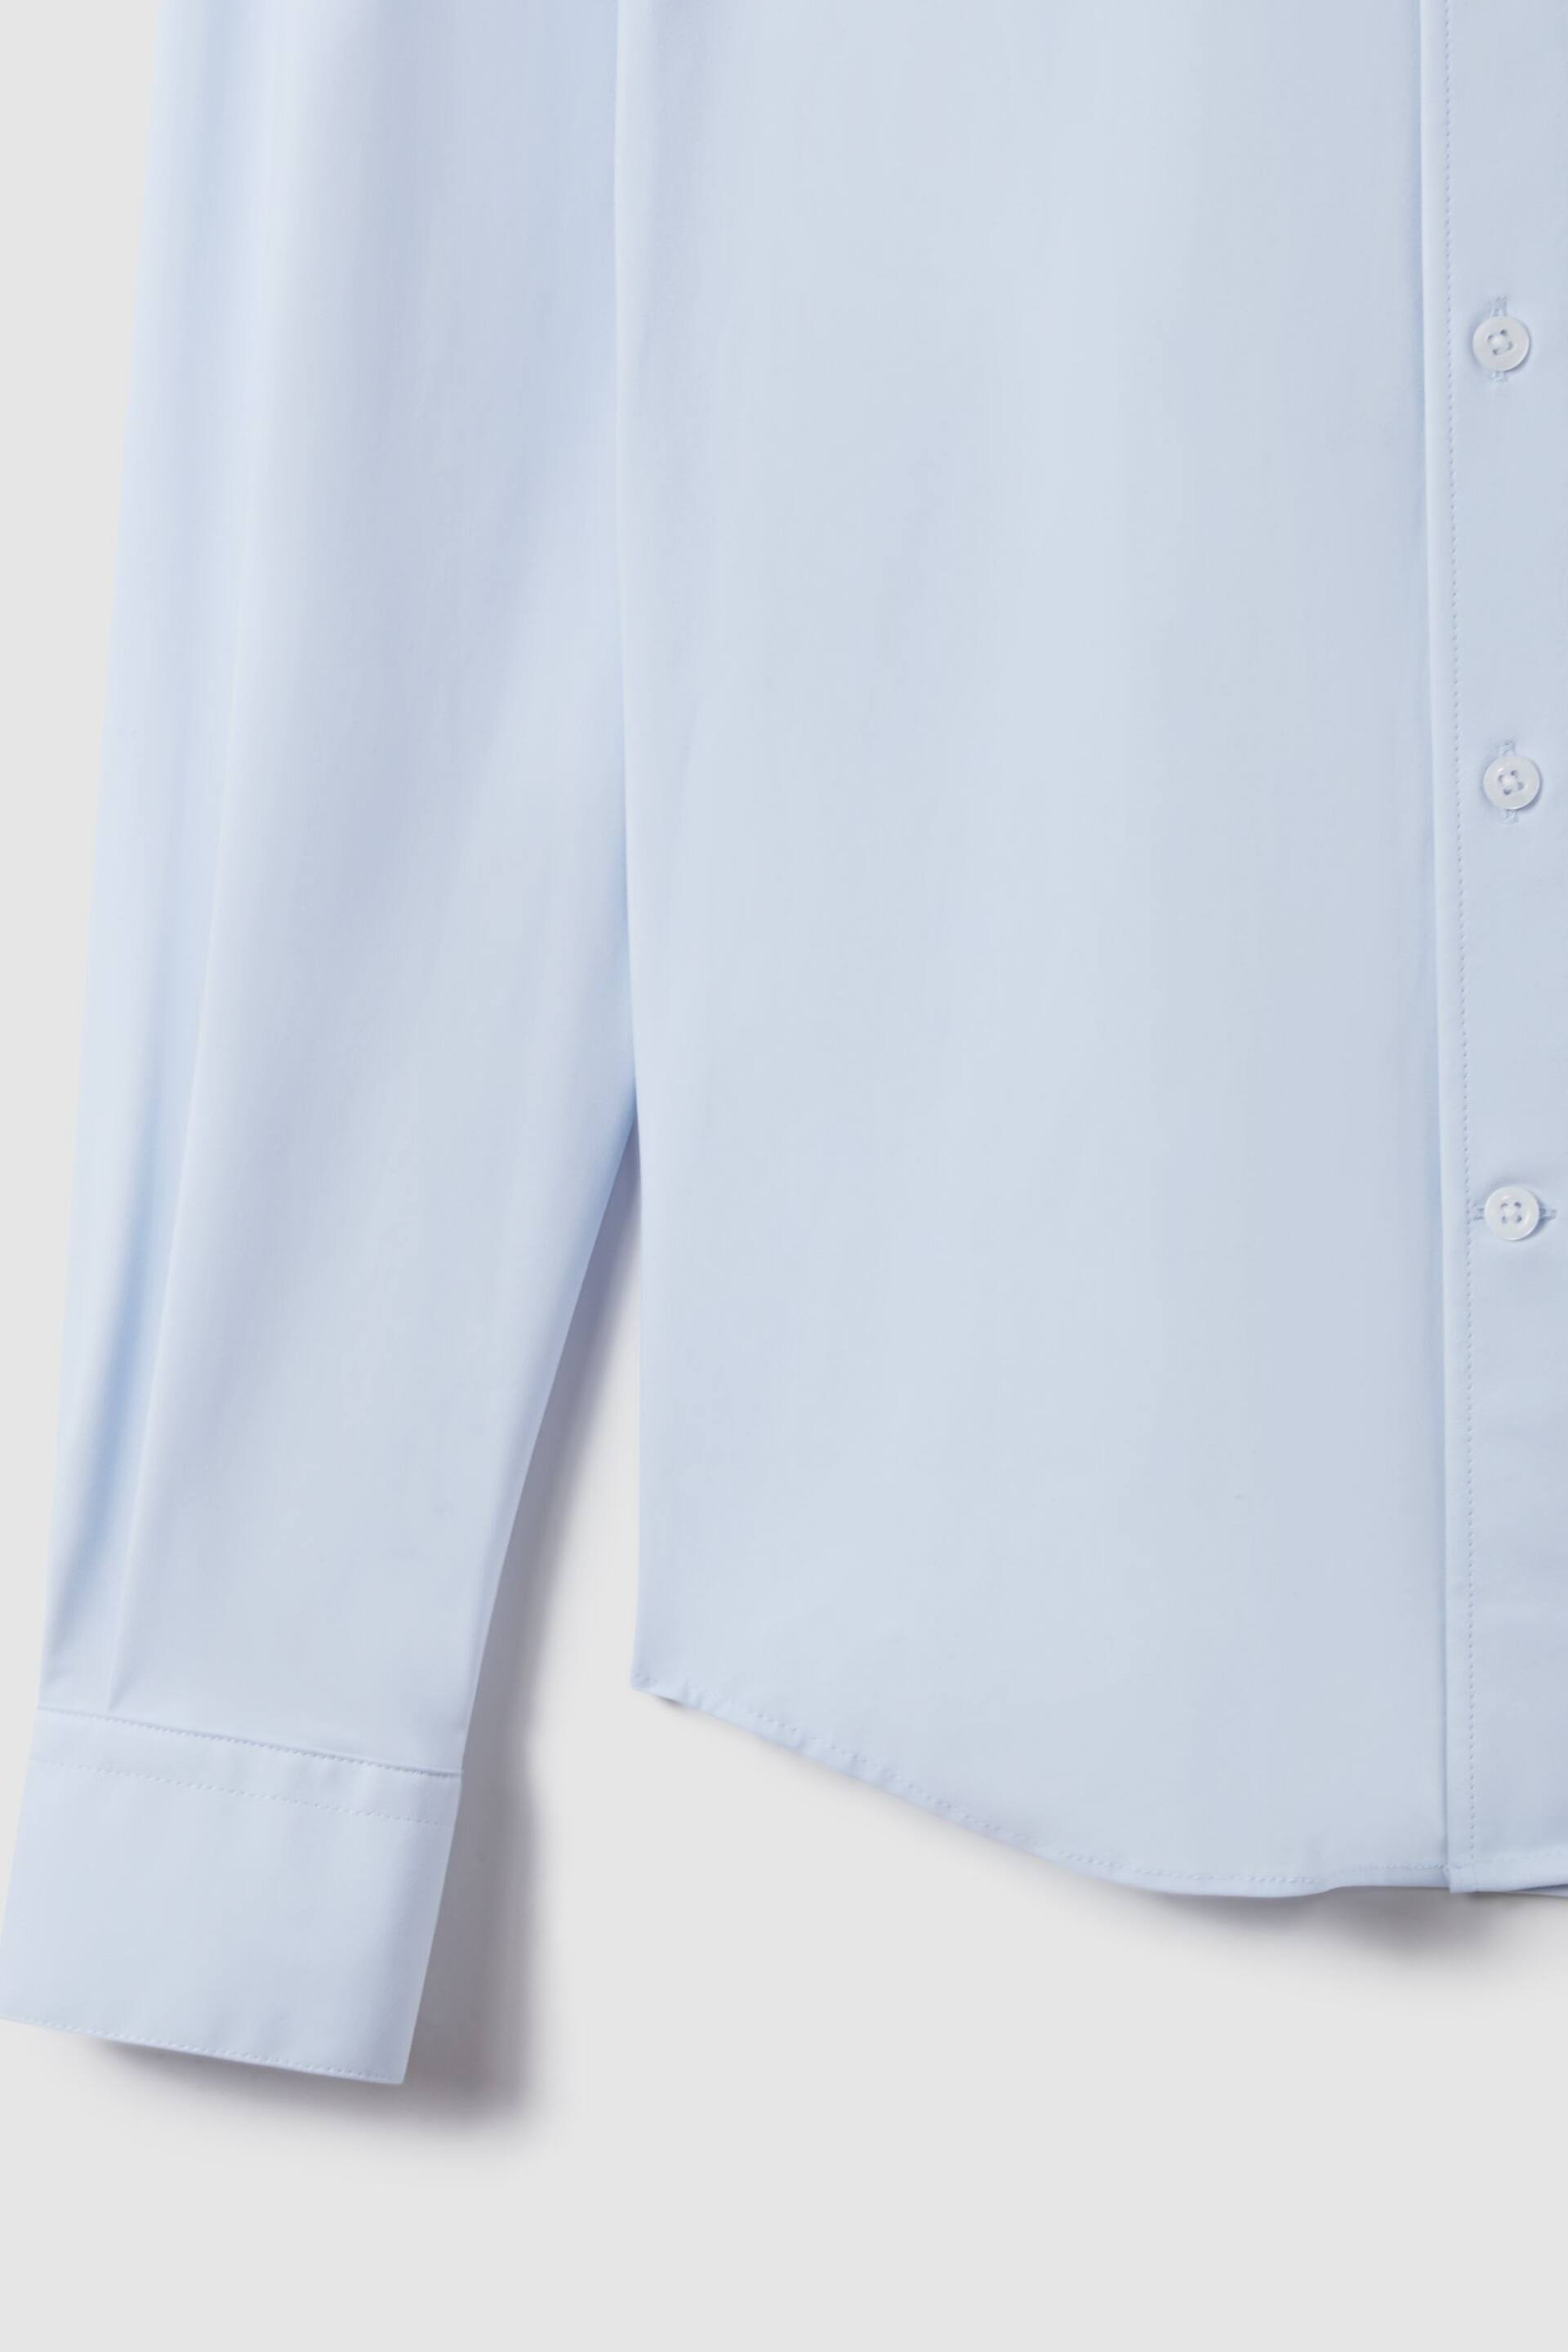 Reiss Soft Blue Voyager Slim Fit Button-Through Travel Shirt - Image 6 of 7